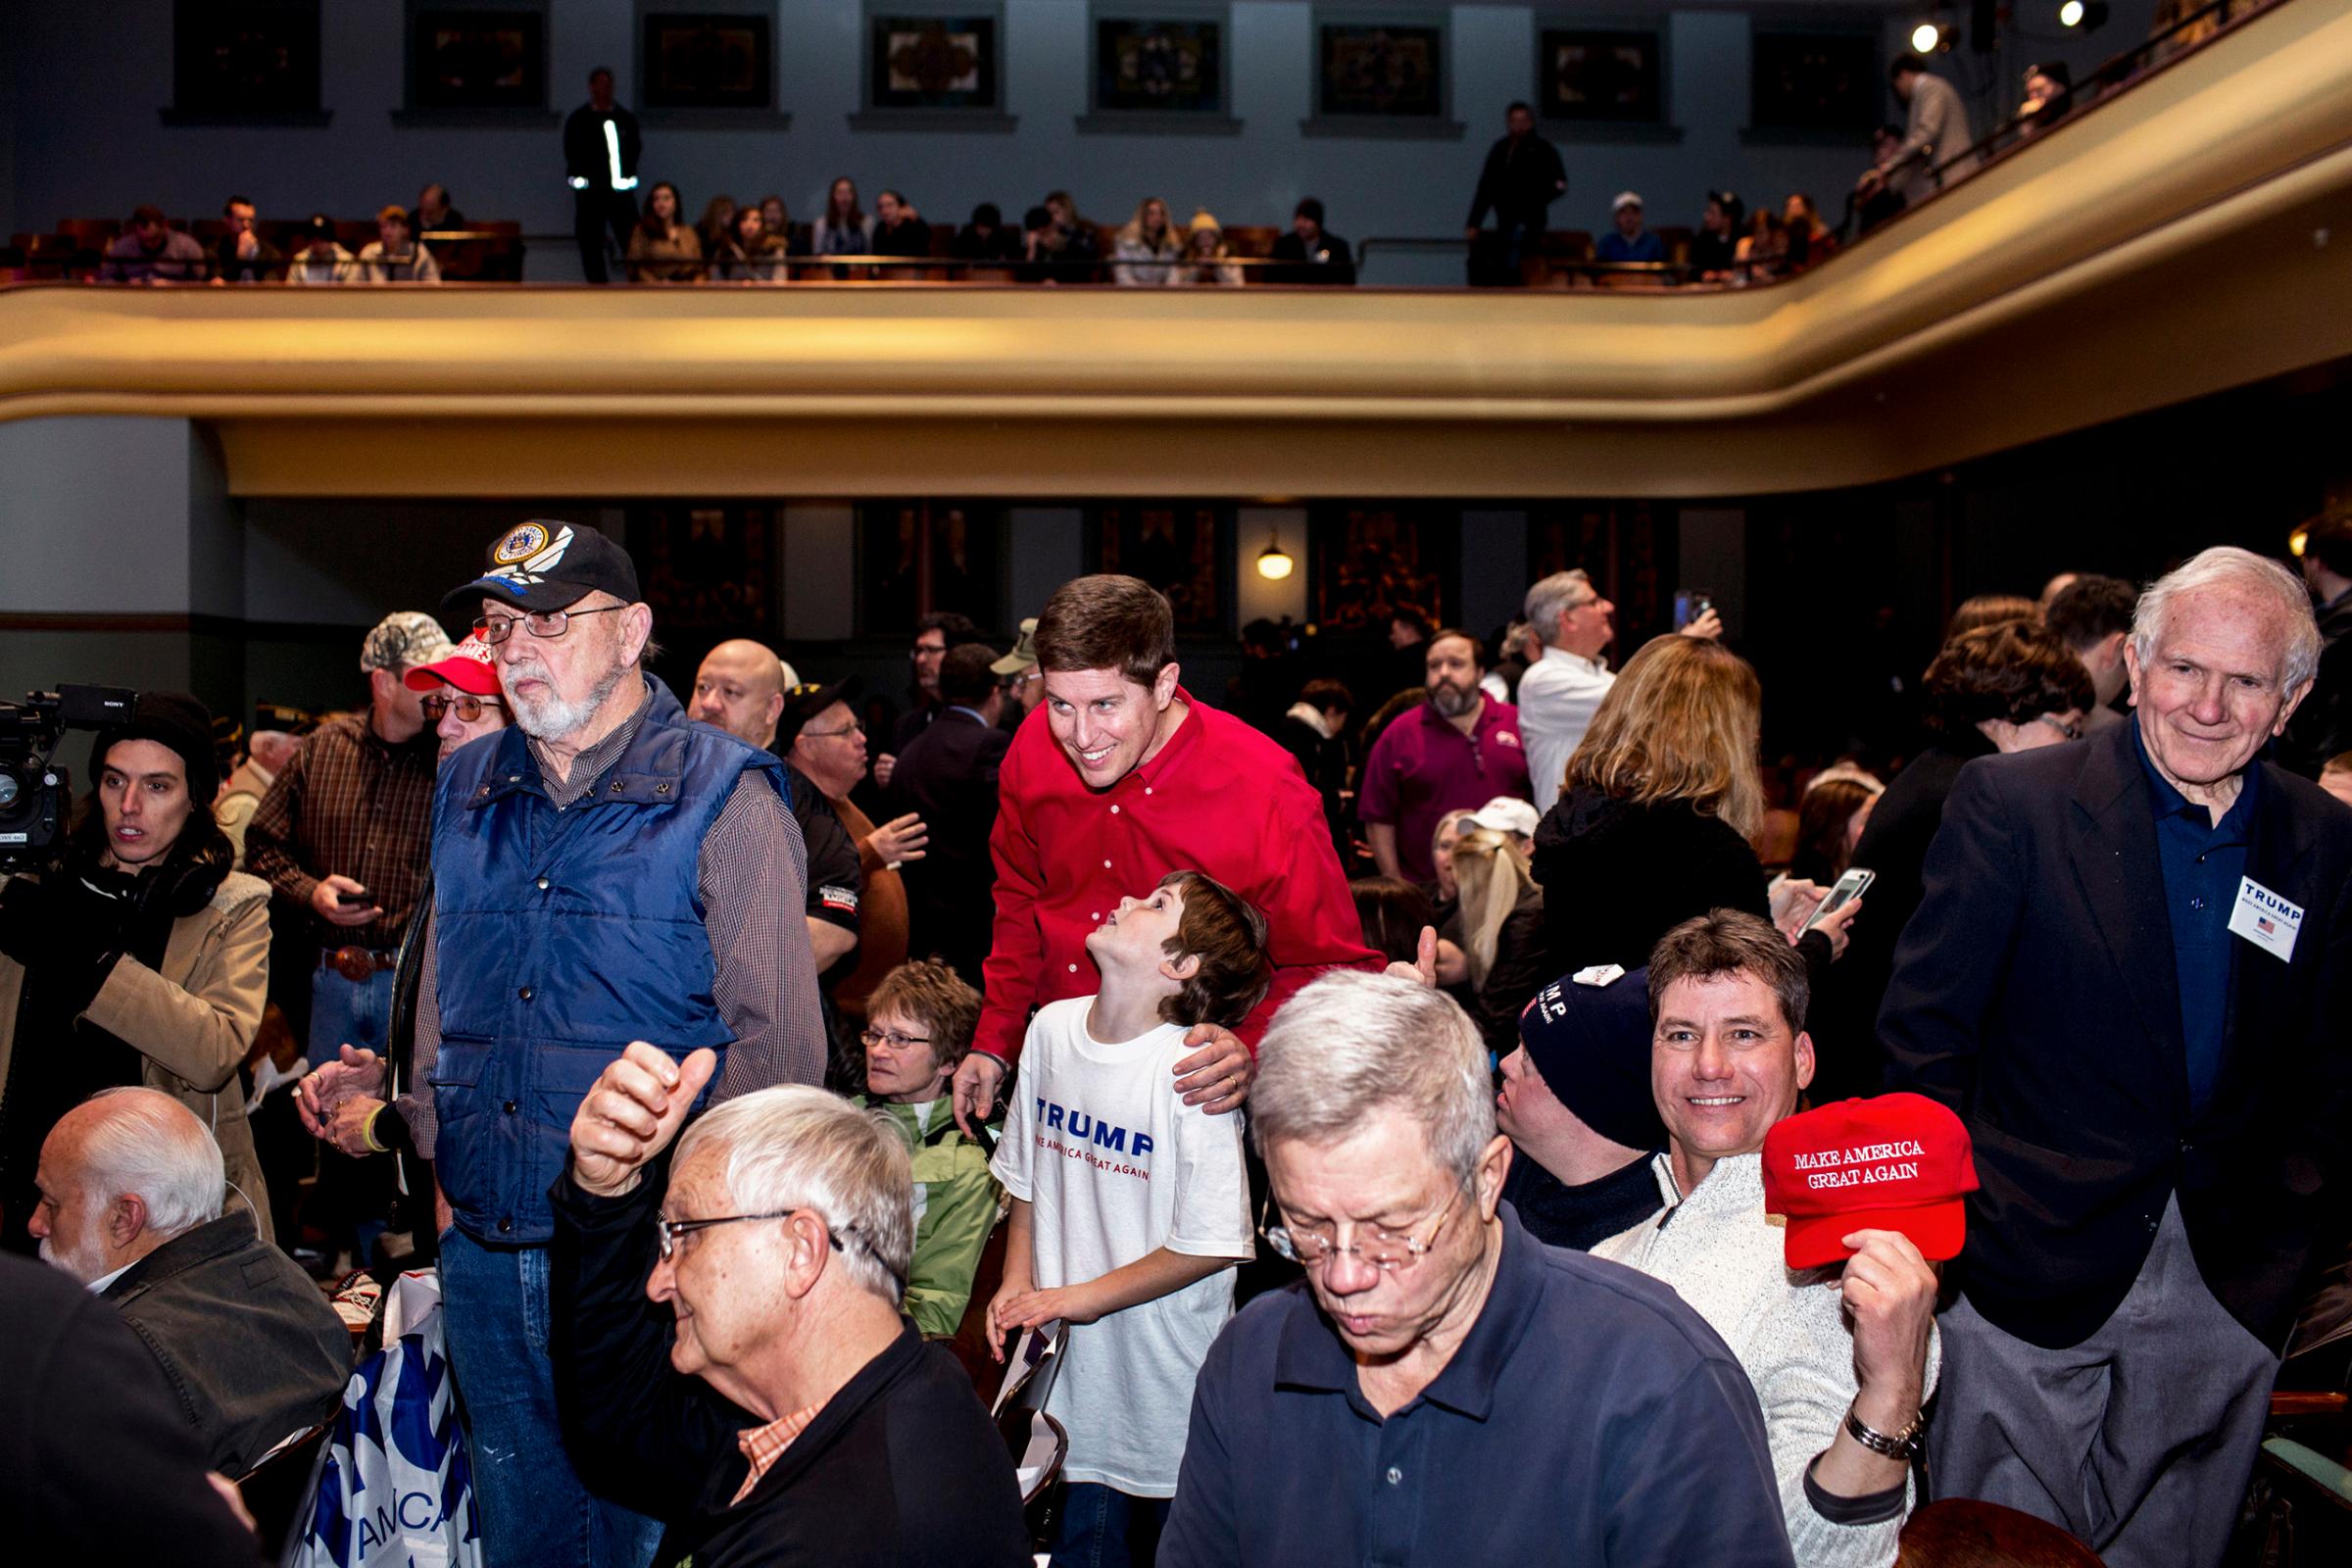 Donald Trump held a benefit rally/campaign rally for the Wounded Warriors, a charity organization for Veterans, at Drake University in Des Moines Iowa on Thursday morning, January 28th 2016. The event was timed to coincide with the Republican debates on Fox which he declined to attend. His event was attended by supporters, veterans and donors, as well as fellow candidates Rick Santorum and Mike Huckabee. (Natalie Keyssar for TIME)